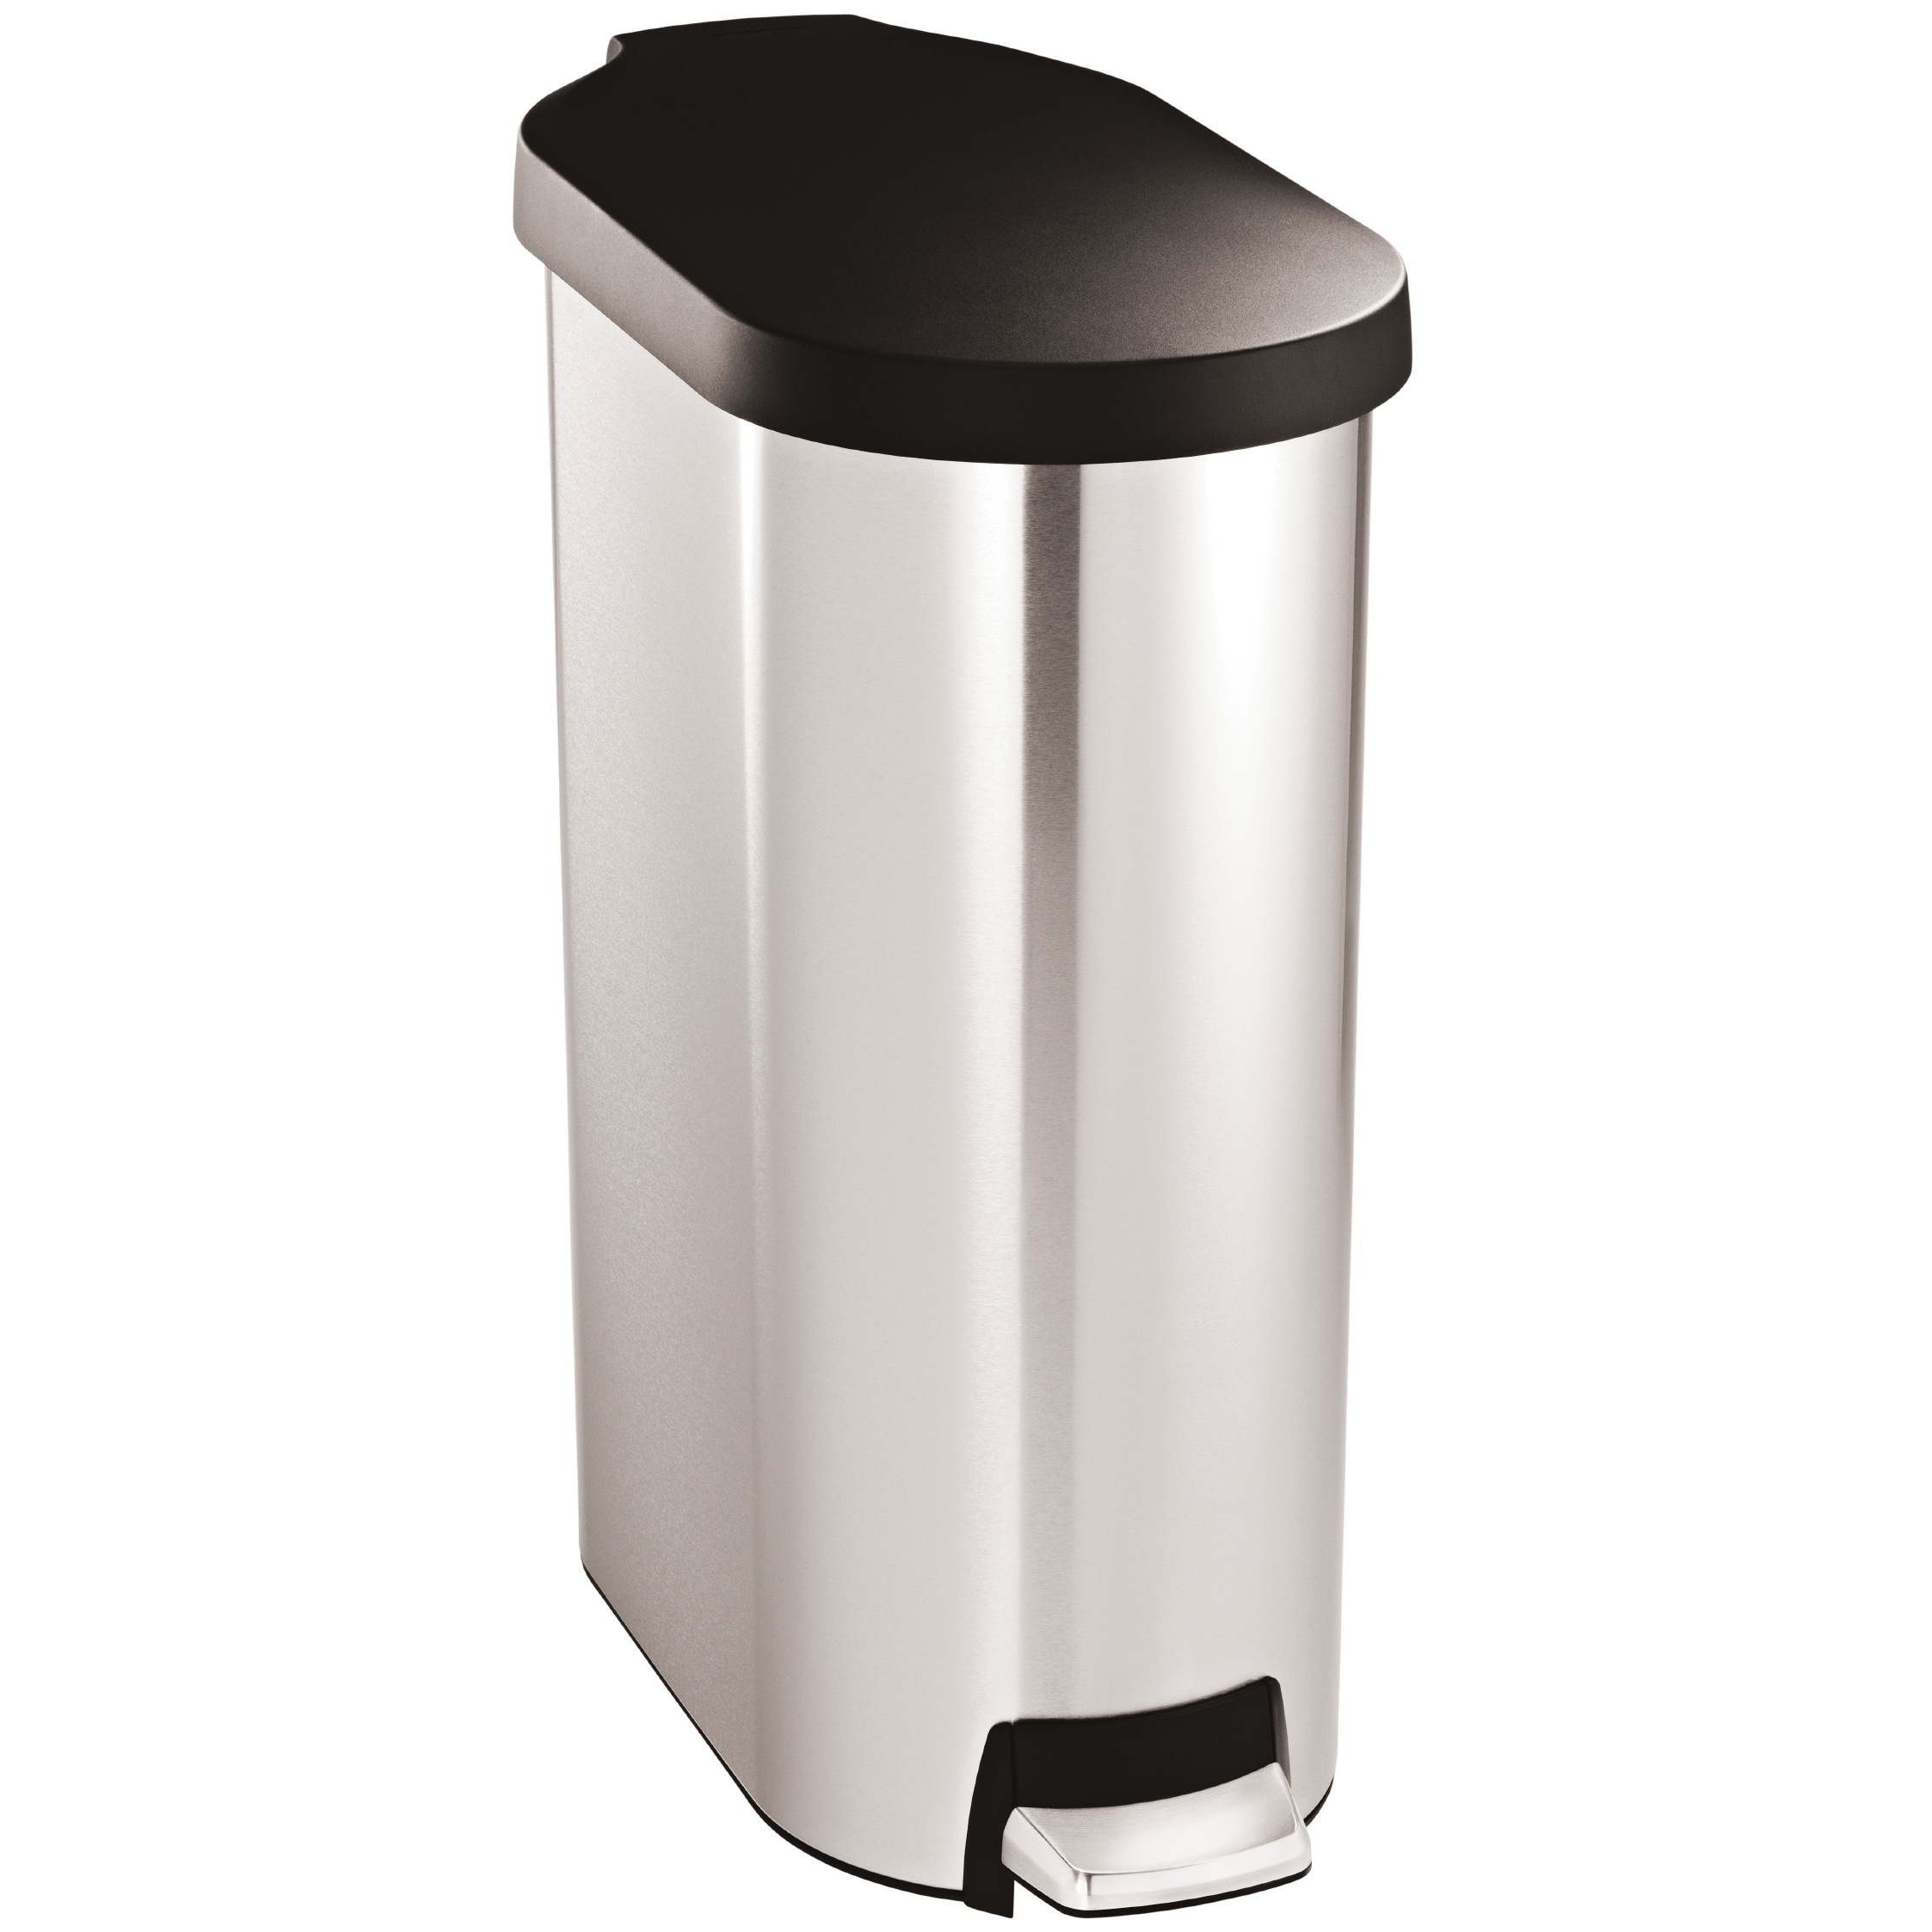 7.9 Gallon Trash Can Stainless Steel Oval Kitchen Trash Can